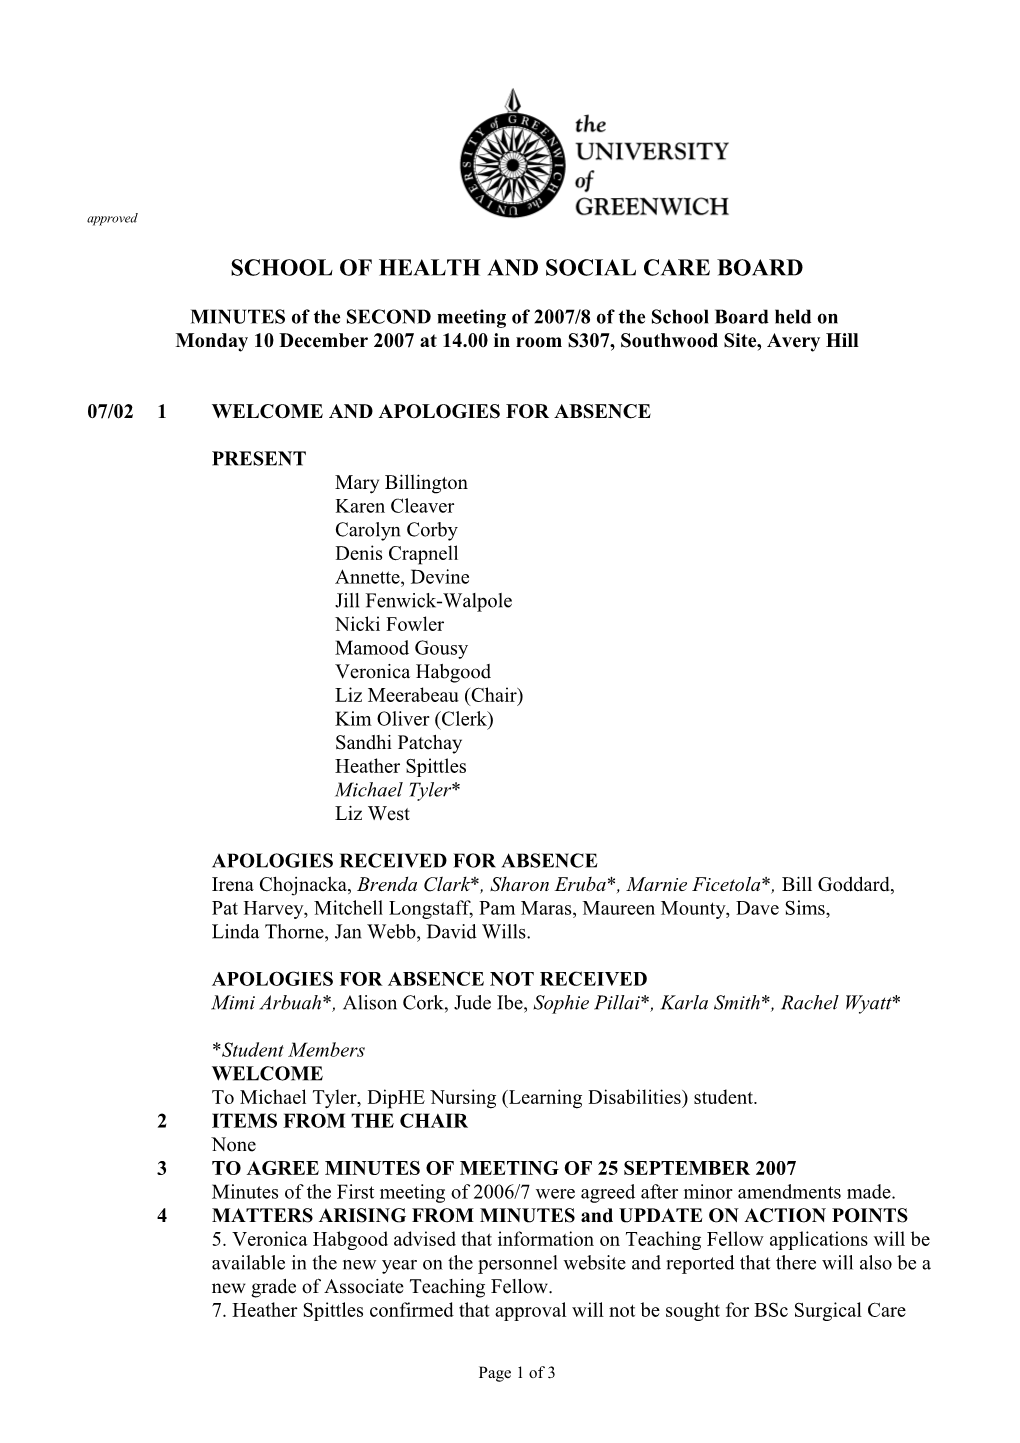 School of Health and Social Care Board